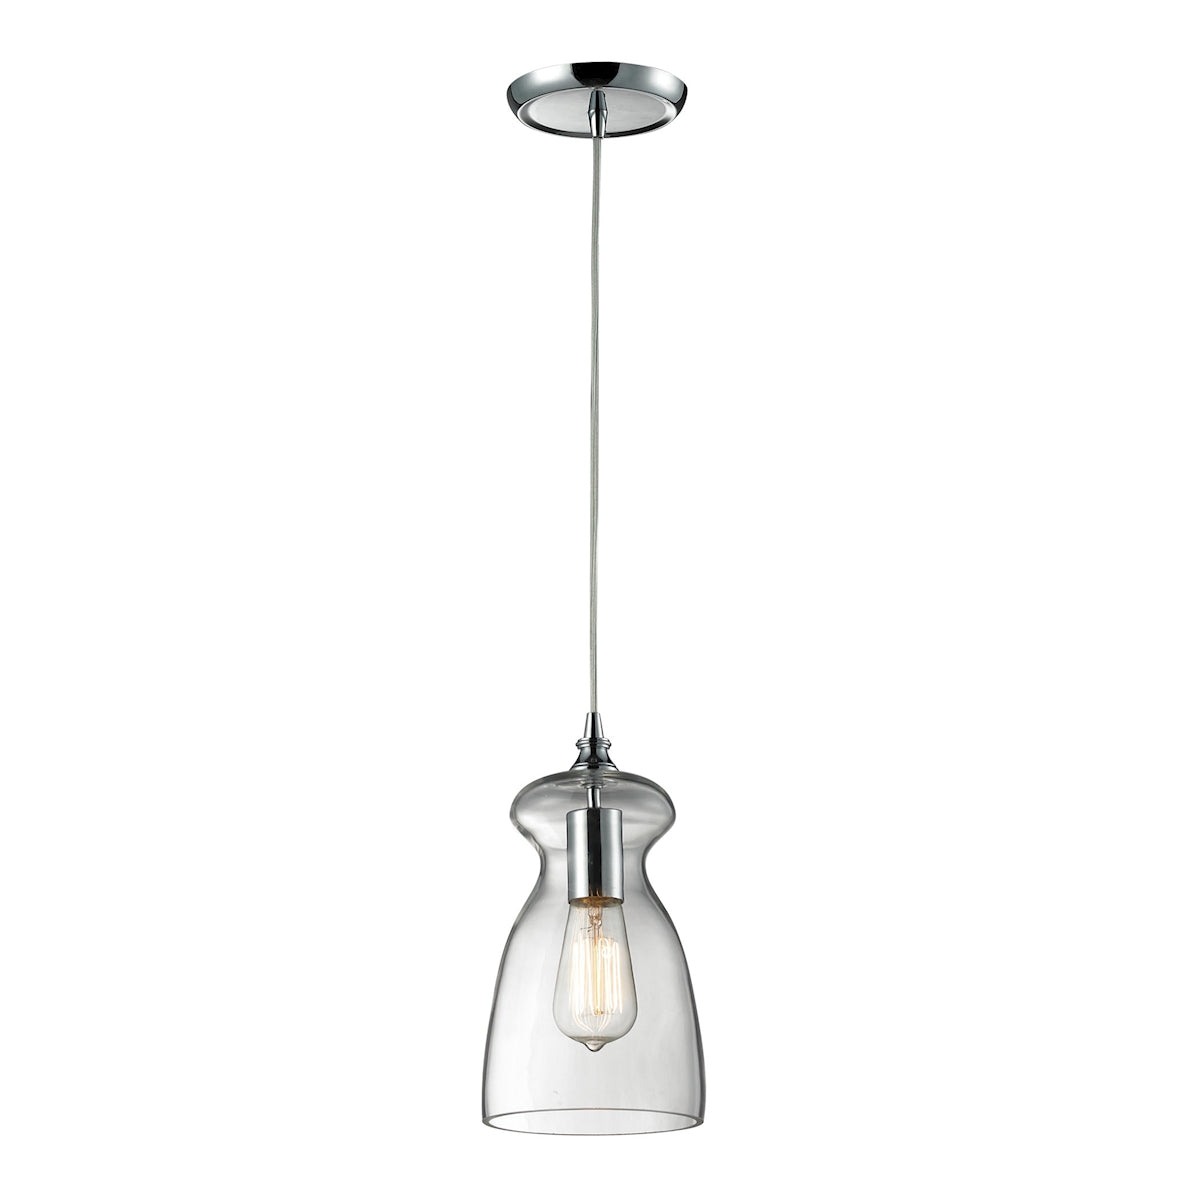 ELK Lighting 60053-1 Menlow Park 1-Light Mini Pendant in Polished Chrome with Smoked Glass